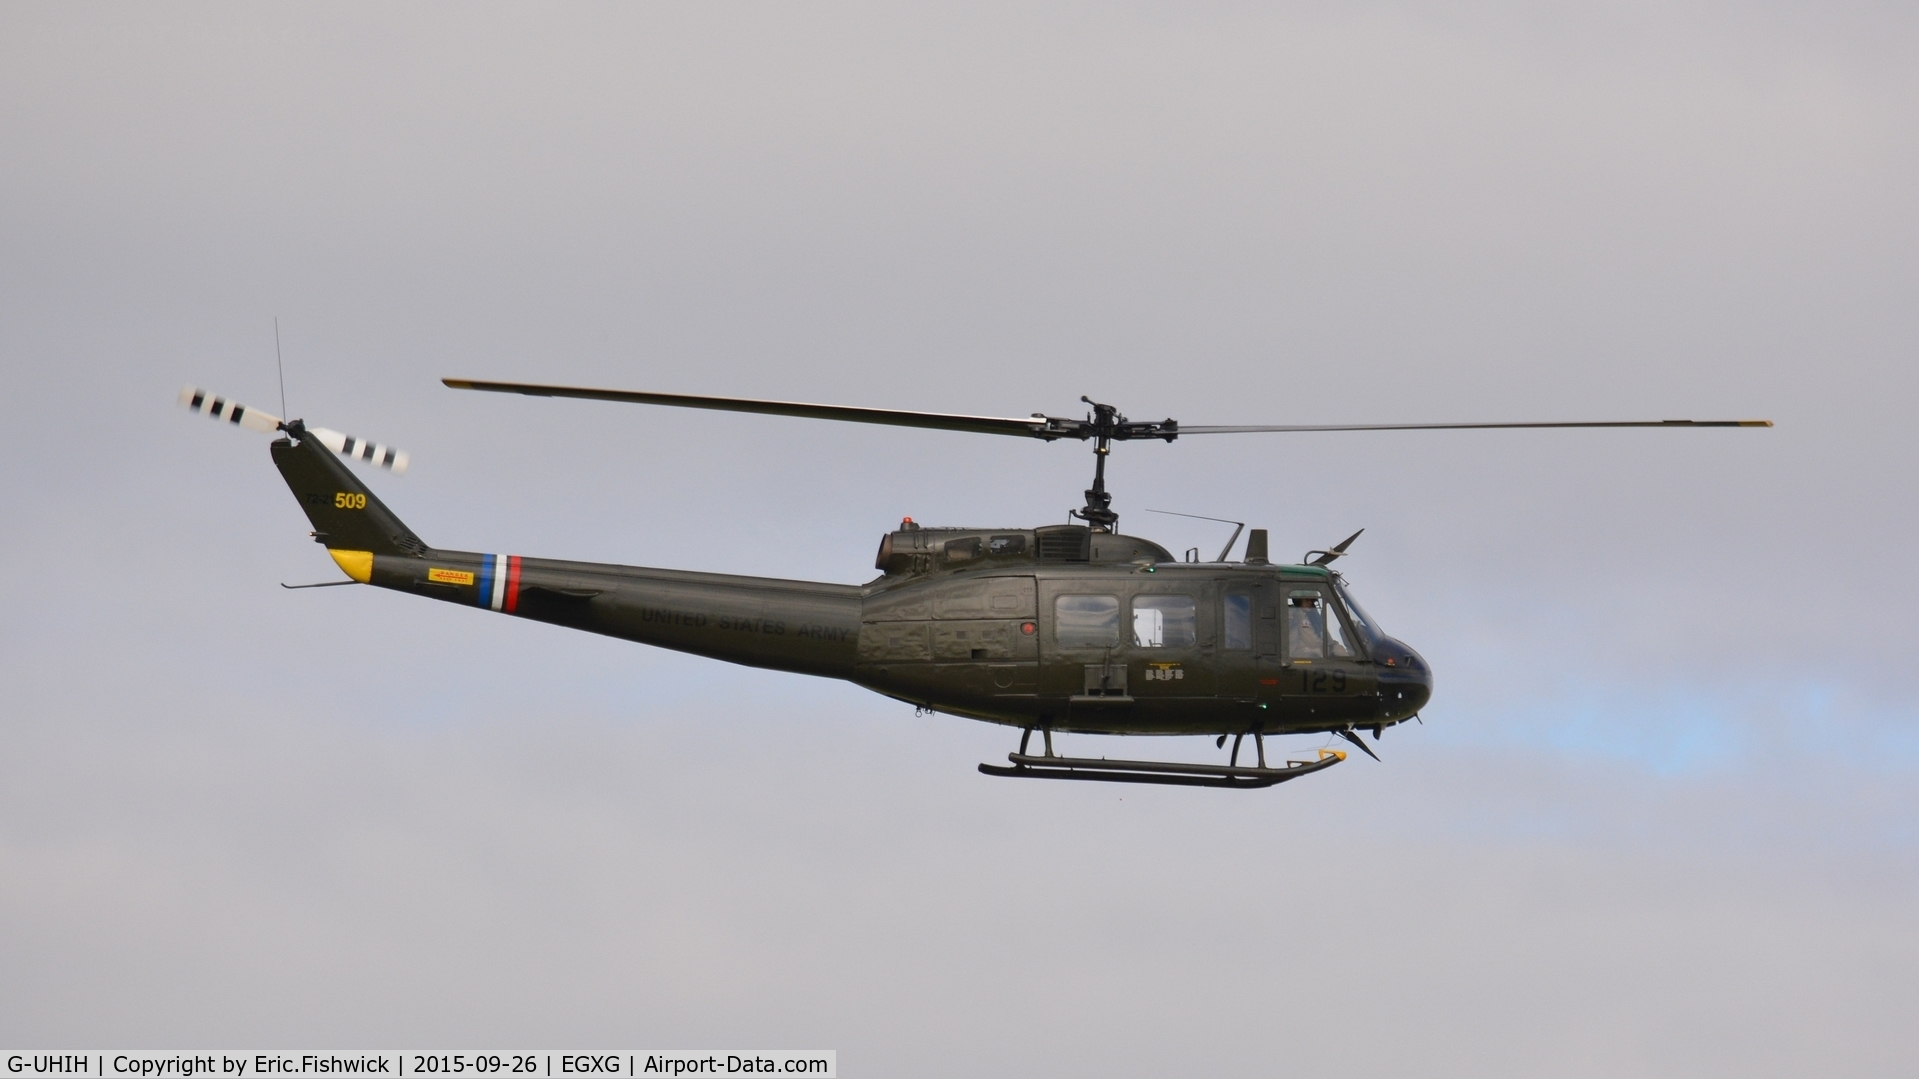 G-UHIH, 1972 Bell UH-1H Iroquois C/N 13208, x. 72-21509 at The Yorkshire Air Show, Church Fenton, Sept. 2015.